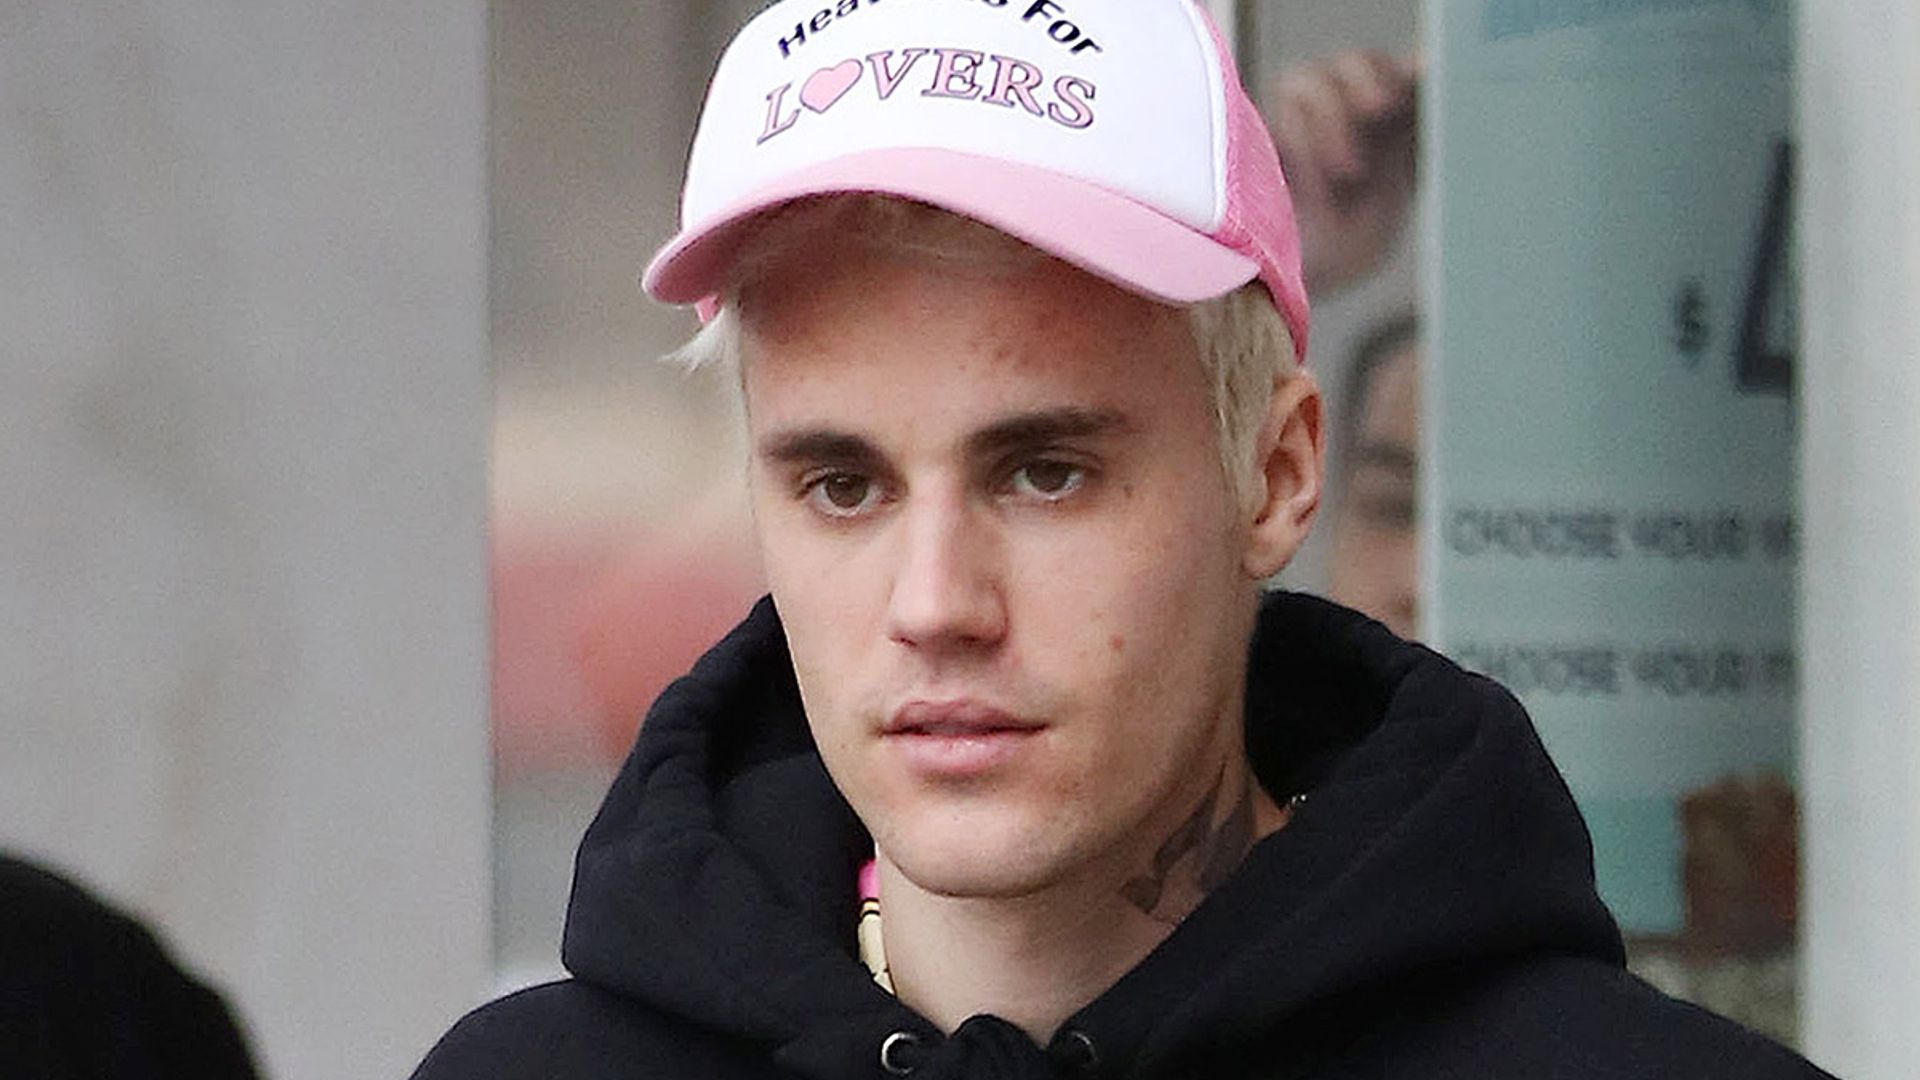 Justin Bieber speaks out about difficult health battles over the last few years